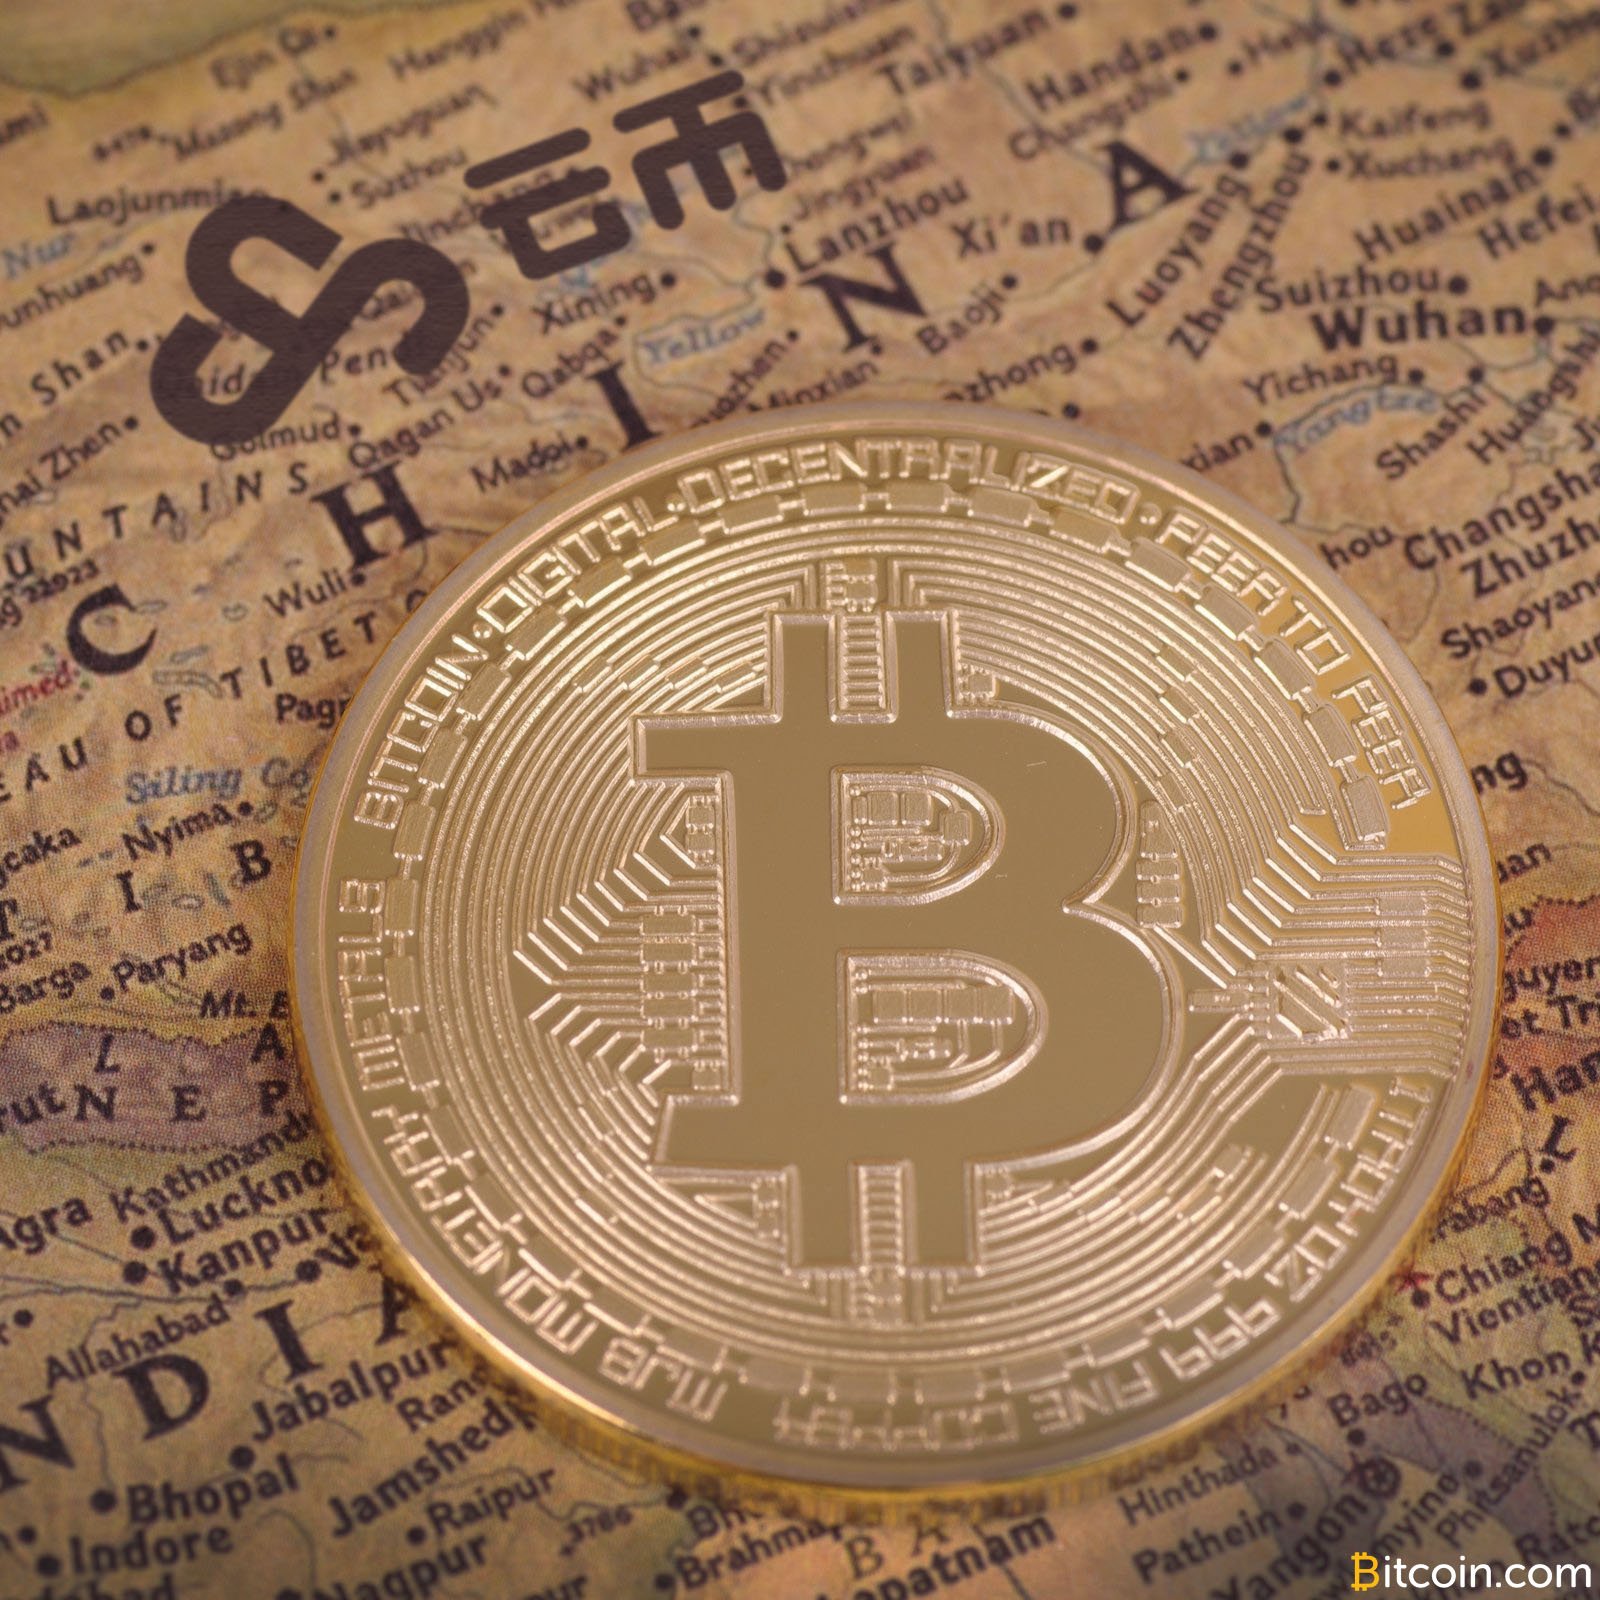 Former Yunbi COO Shares His Outlook for Bitcoin Markets After China's Crackdown